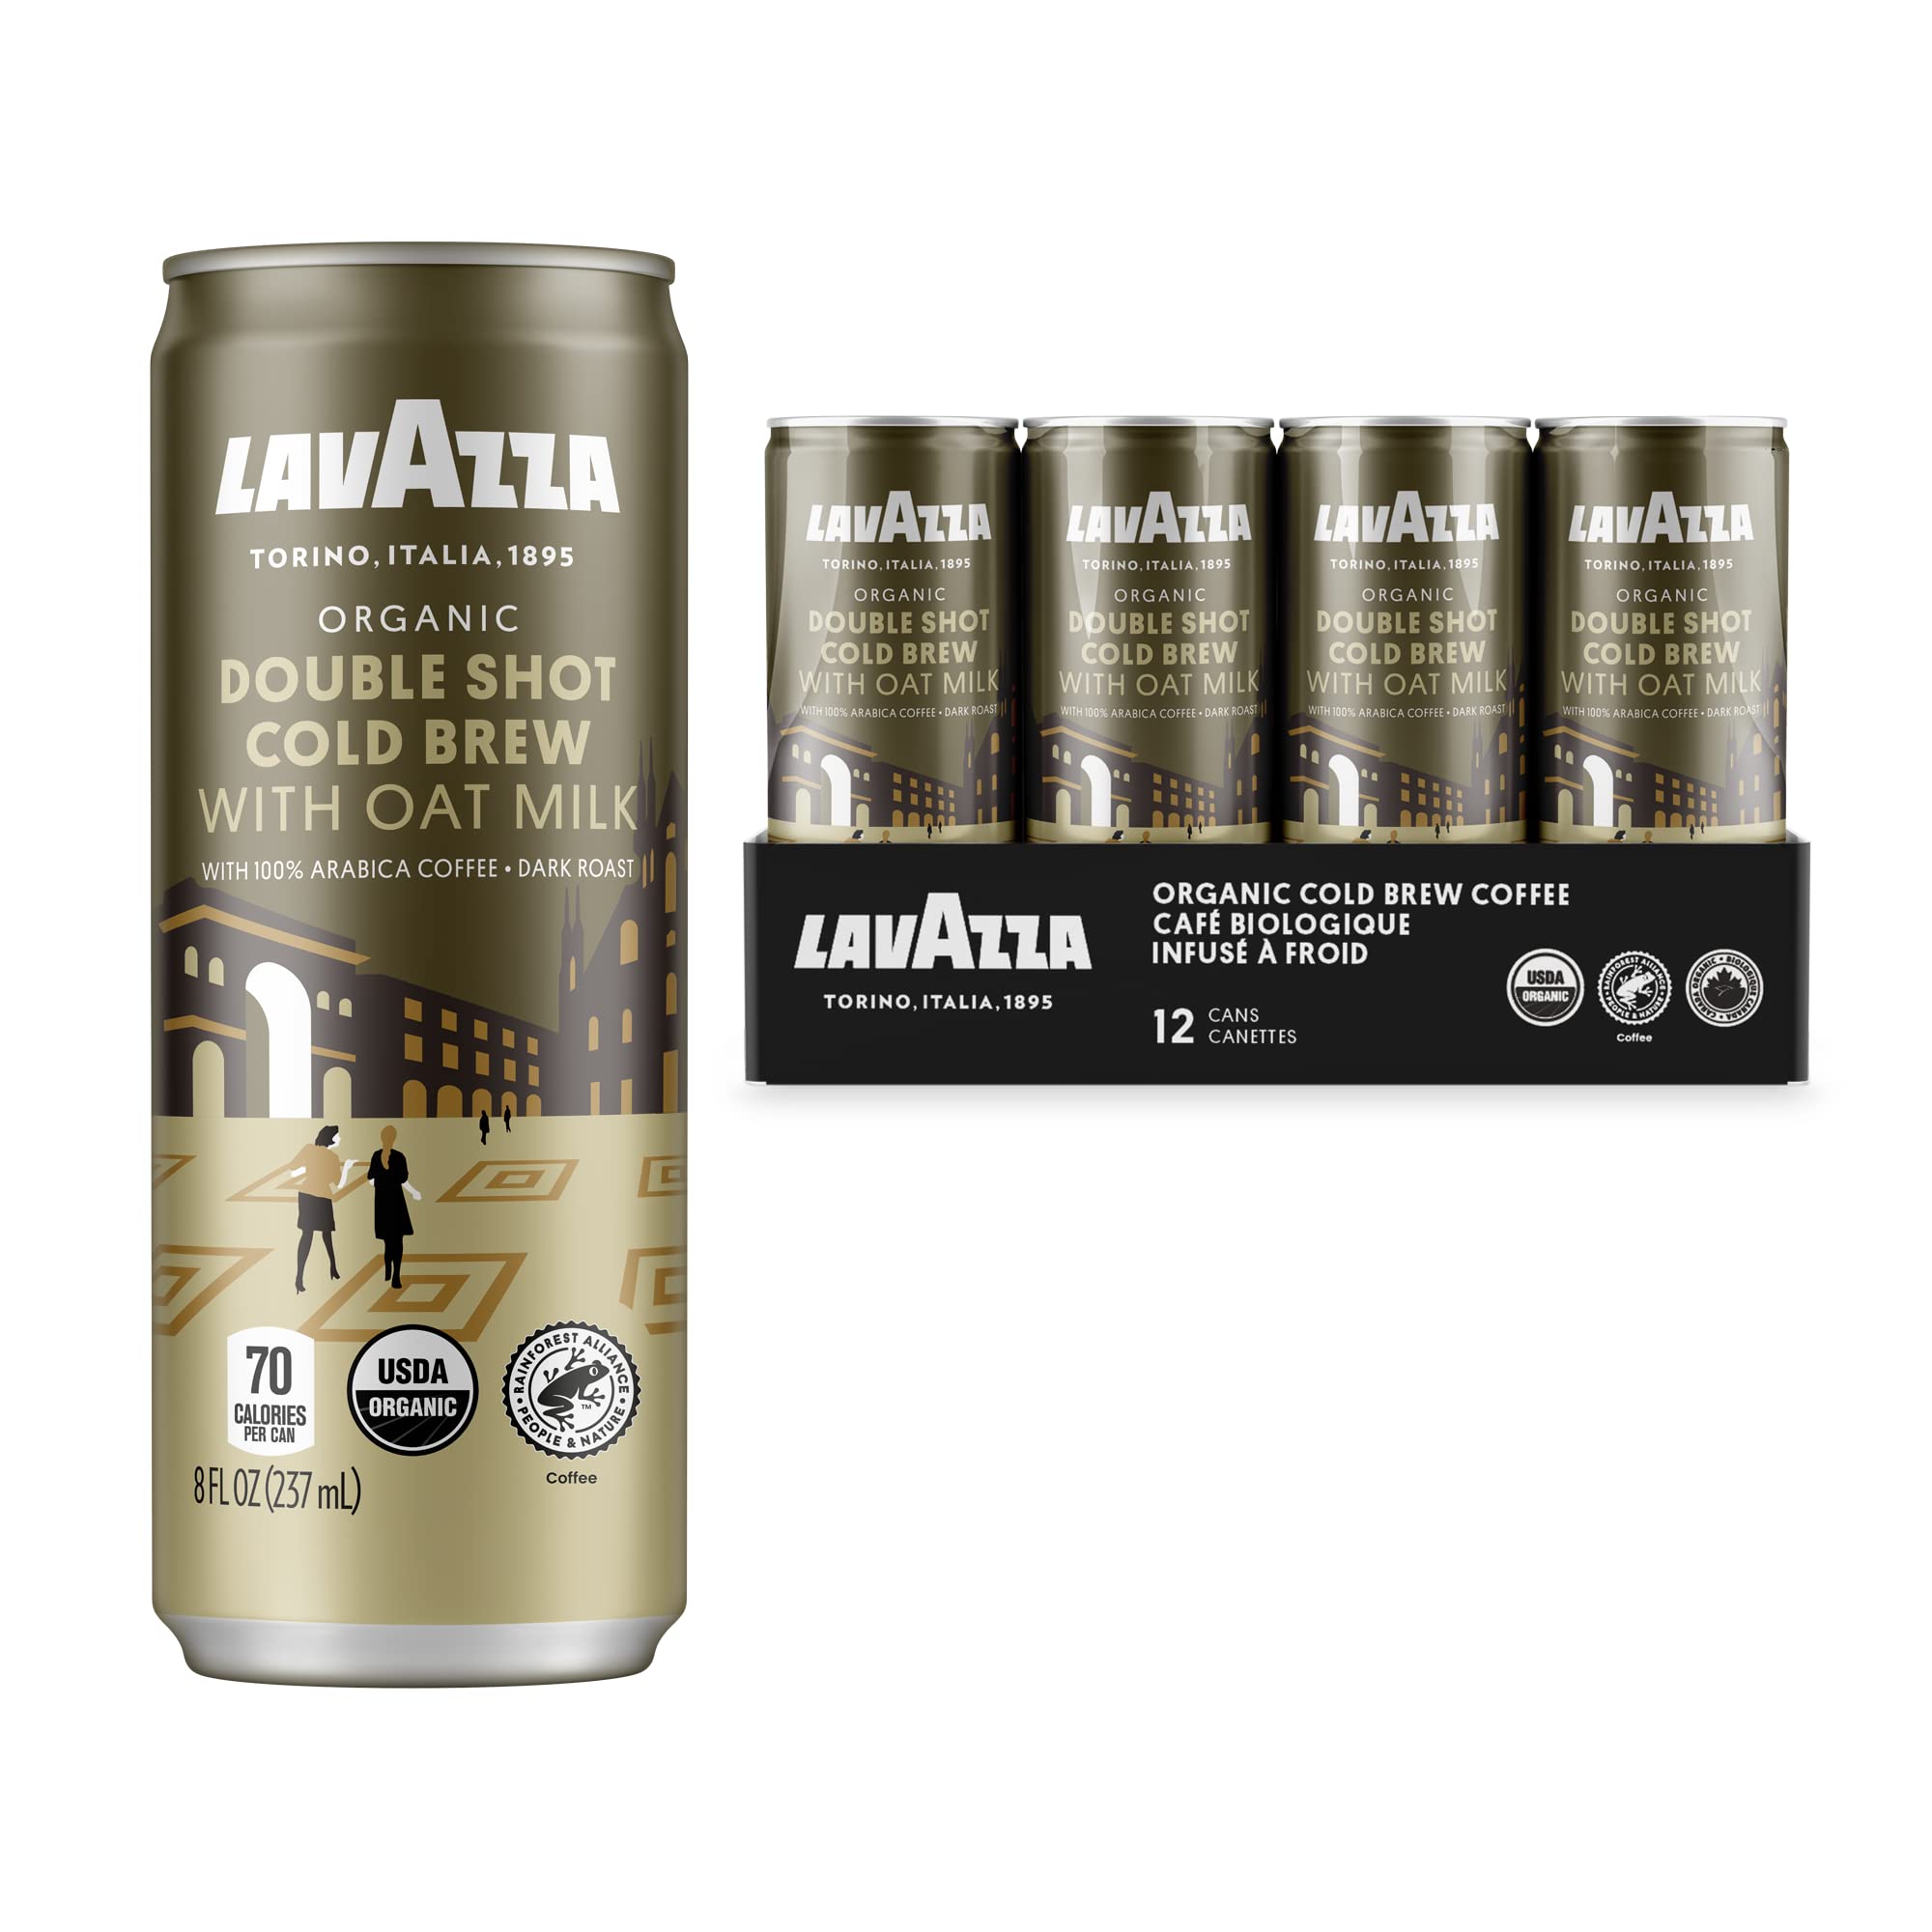 12-Pack 8-Oz Lavazza Organic Double Shot Cold Brew Coffee w/ Oat Milk $18.48 ($1.54 Each) w/ S&S + Free Shipping w/ Prime or on $25+